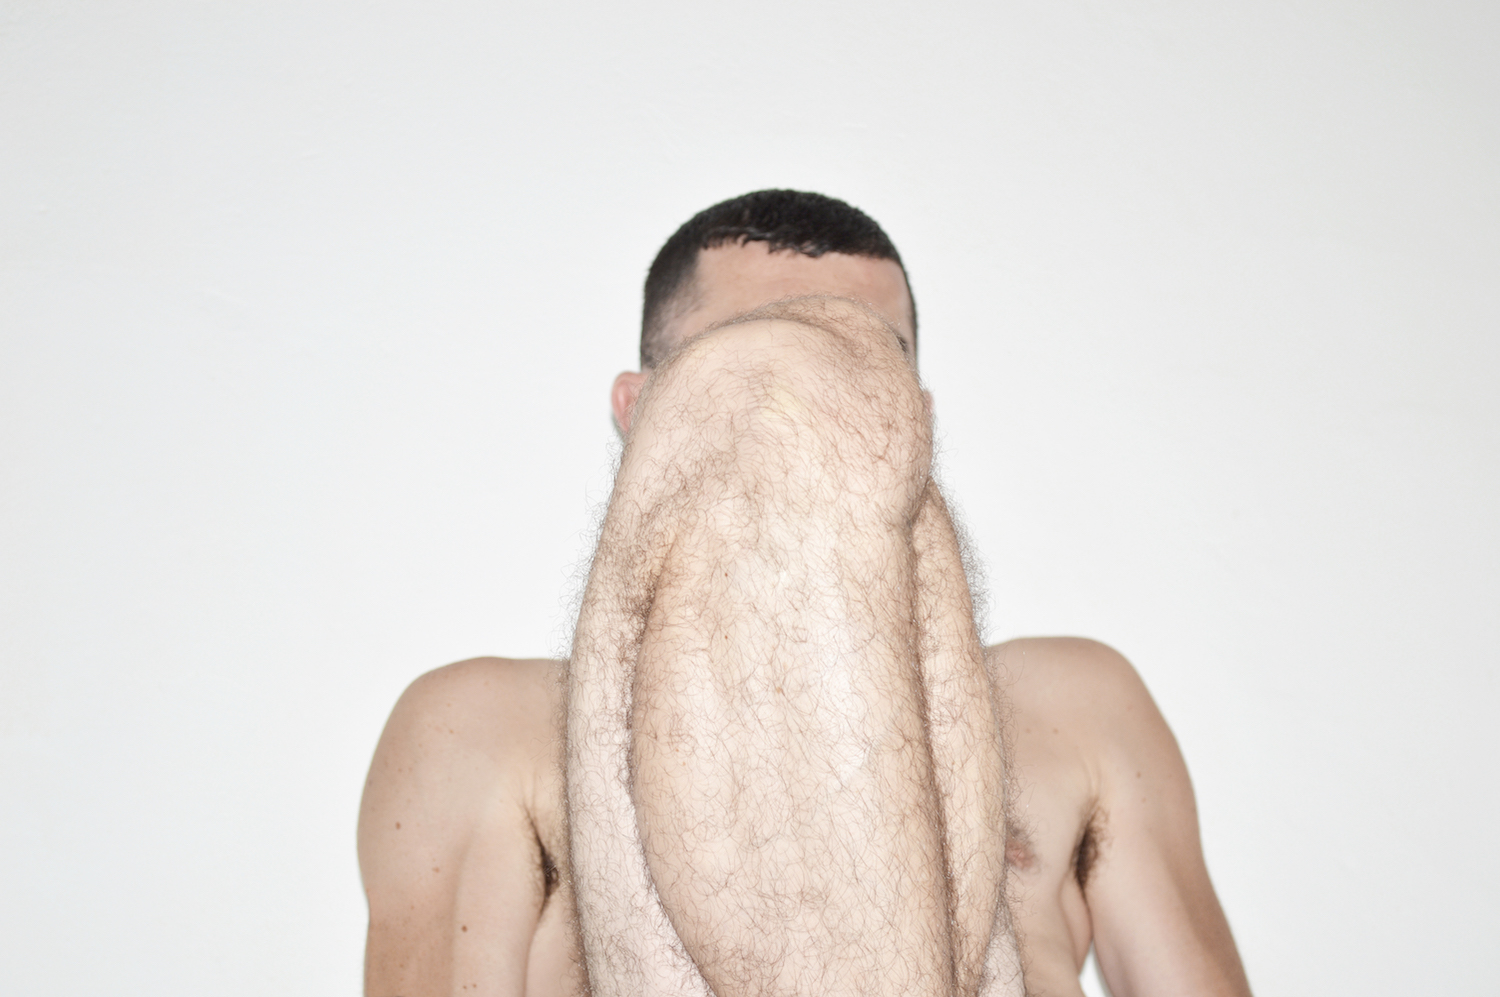 A Surrealist Vision Of Queer Male Sexuality